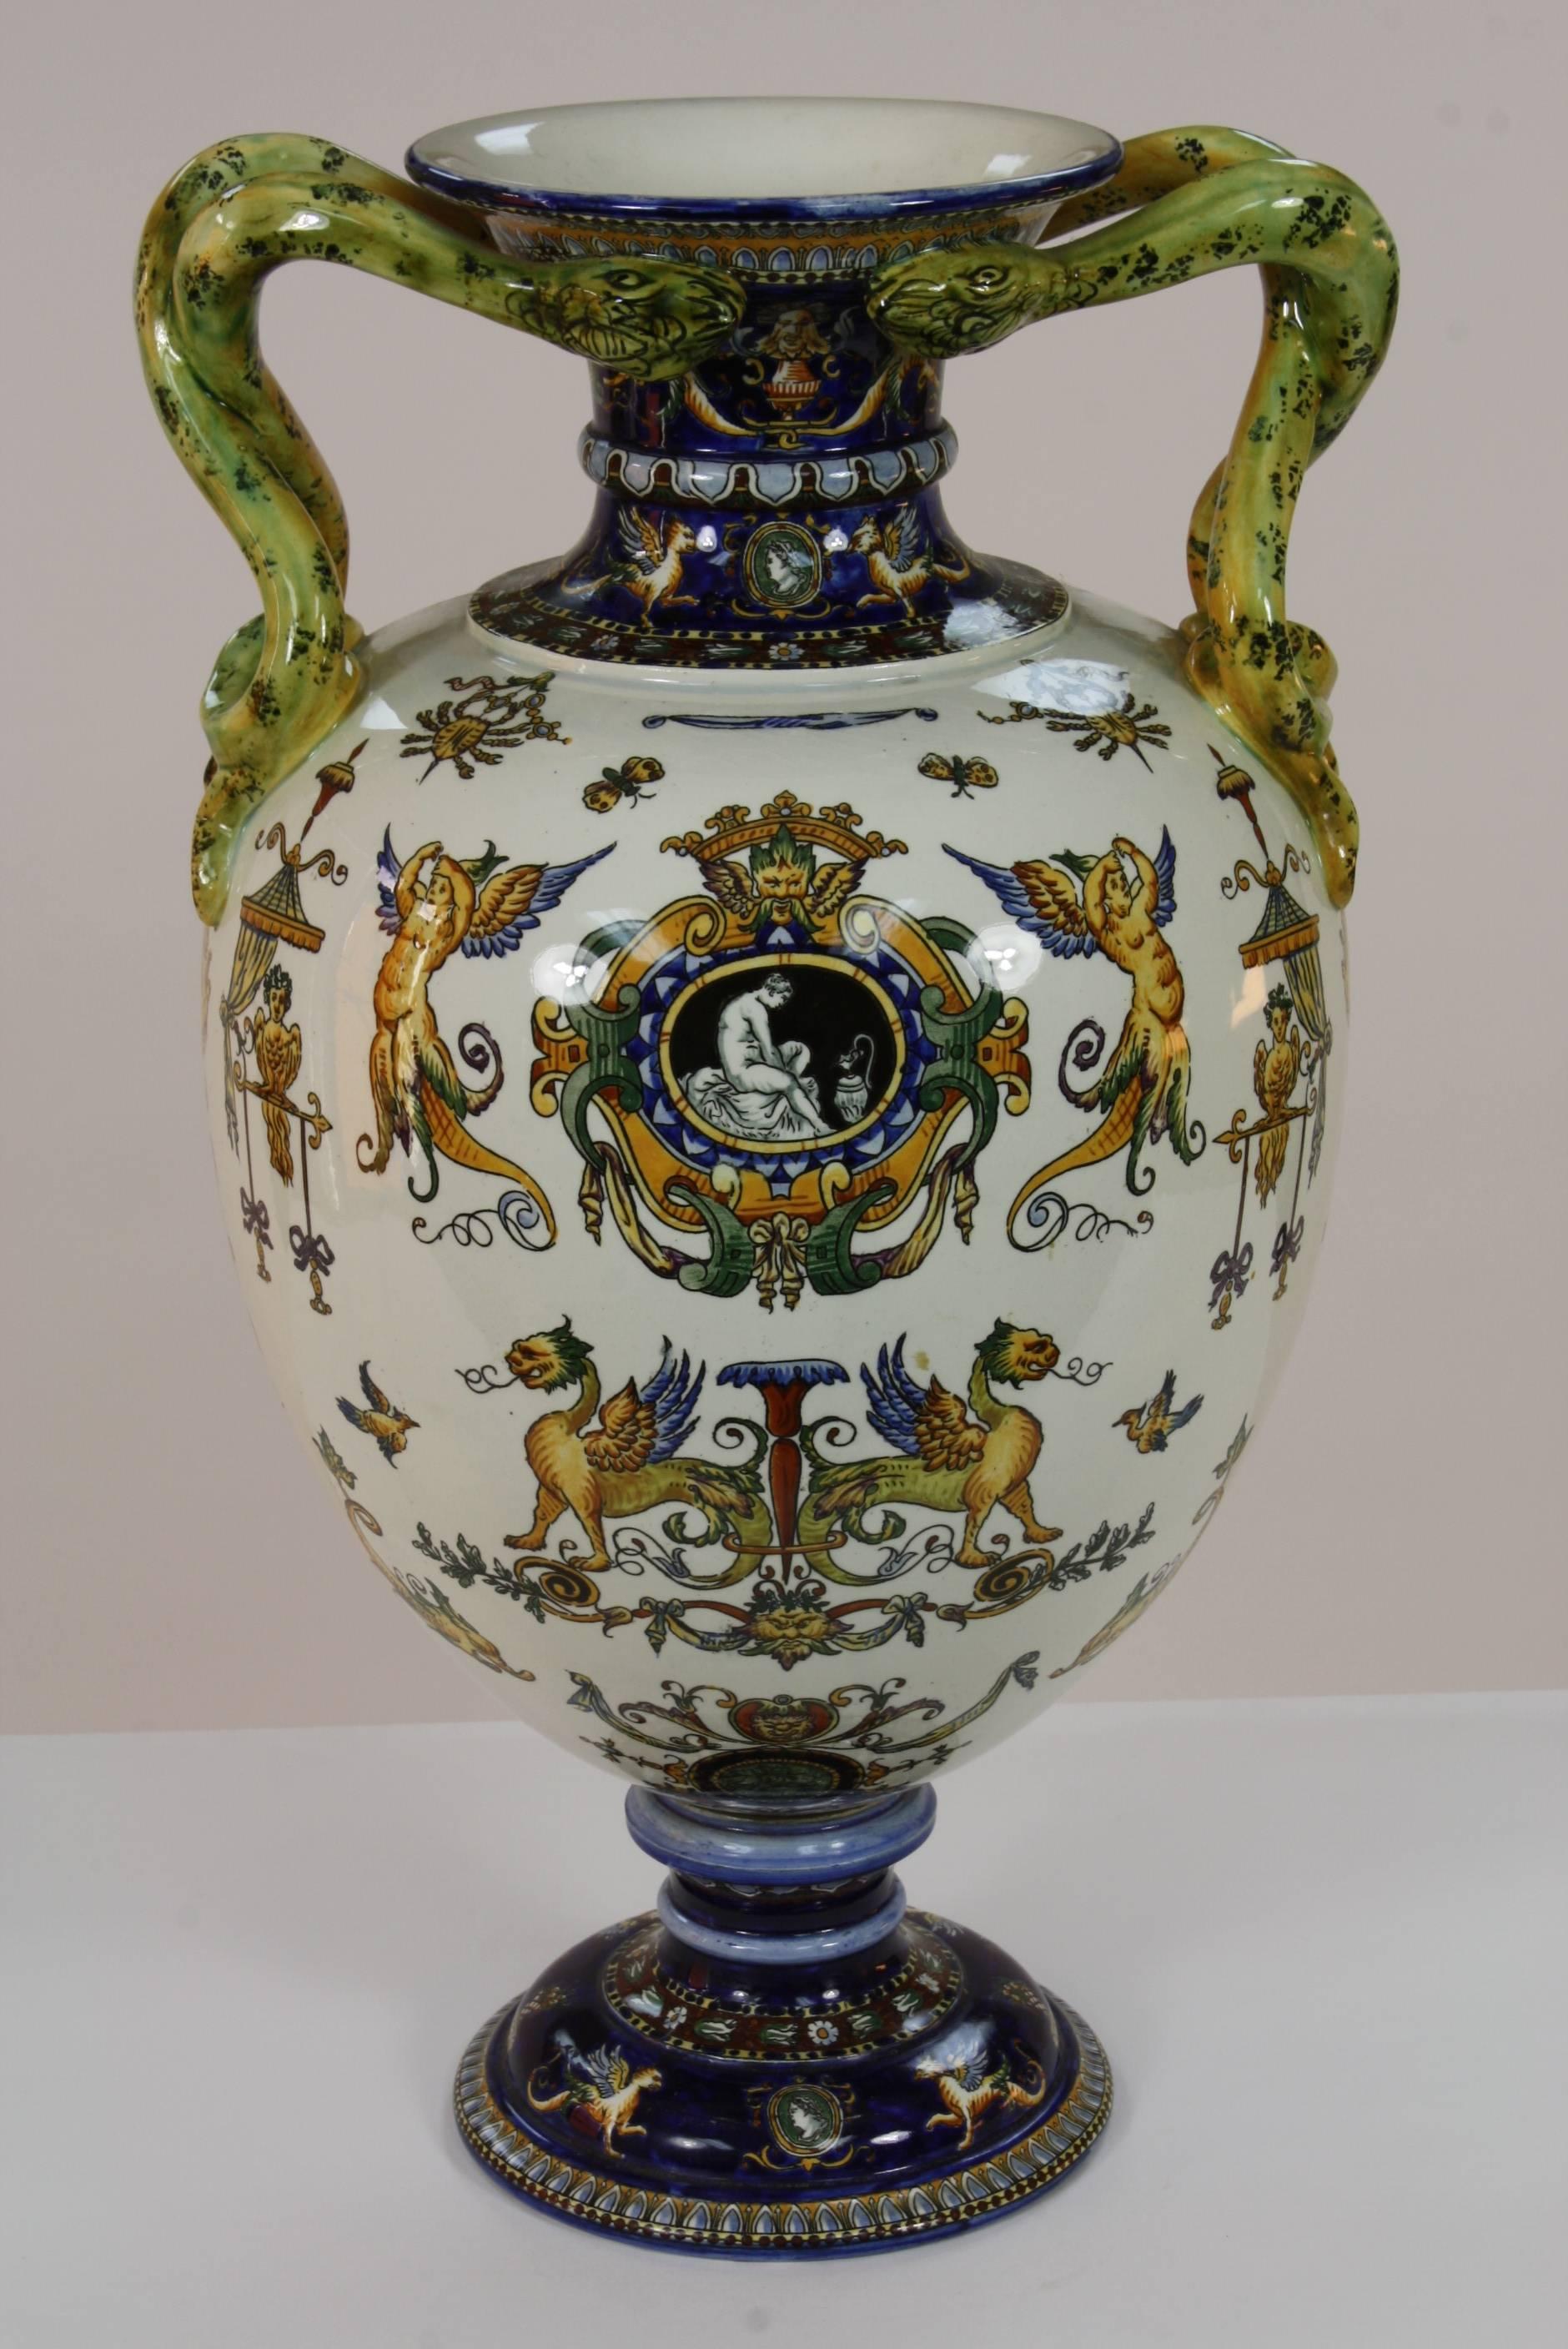 Painted Large Italian Renaissance Style Faience Vase with Snake Handles by Gien